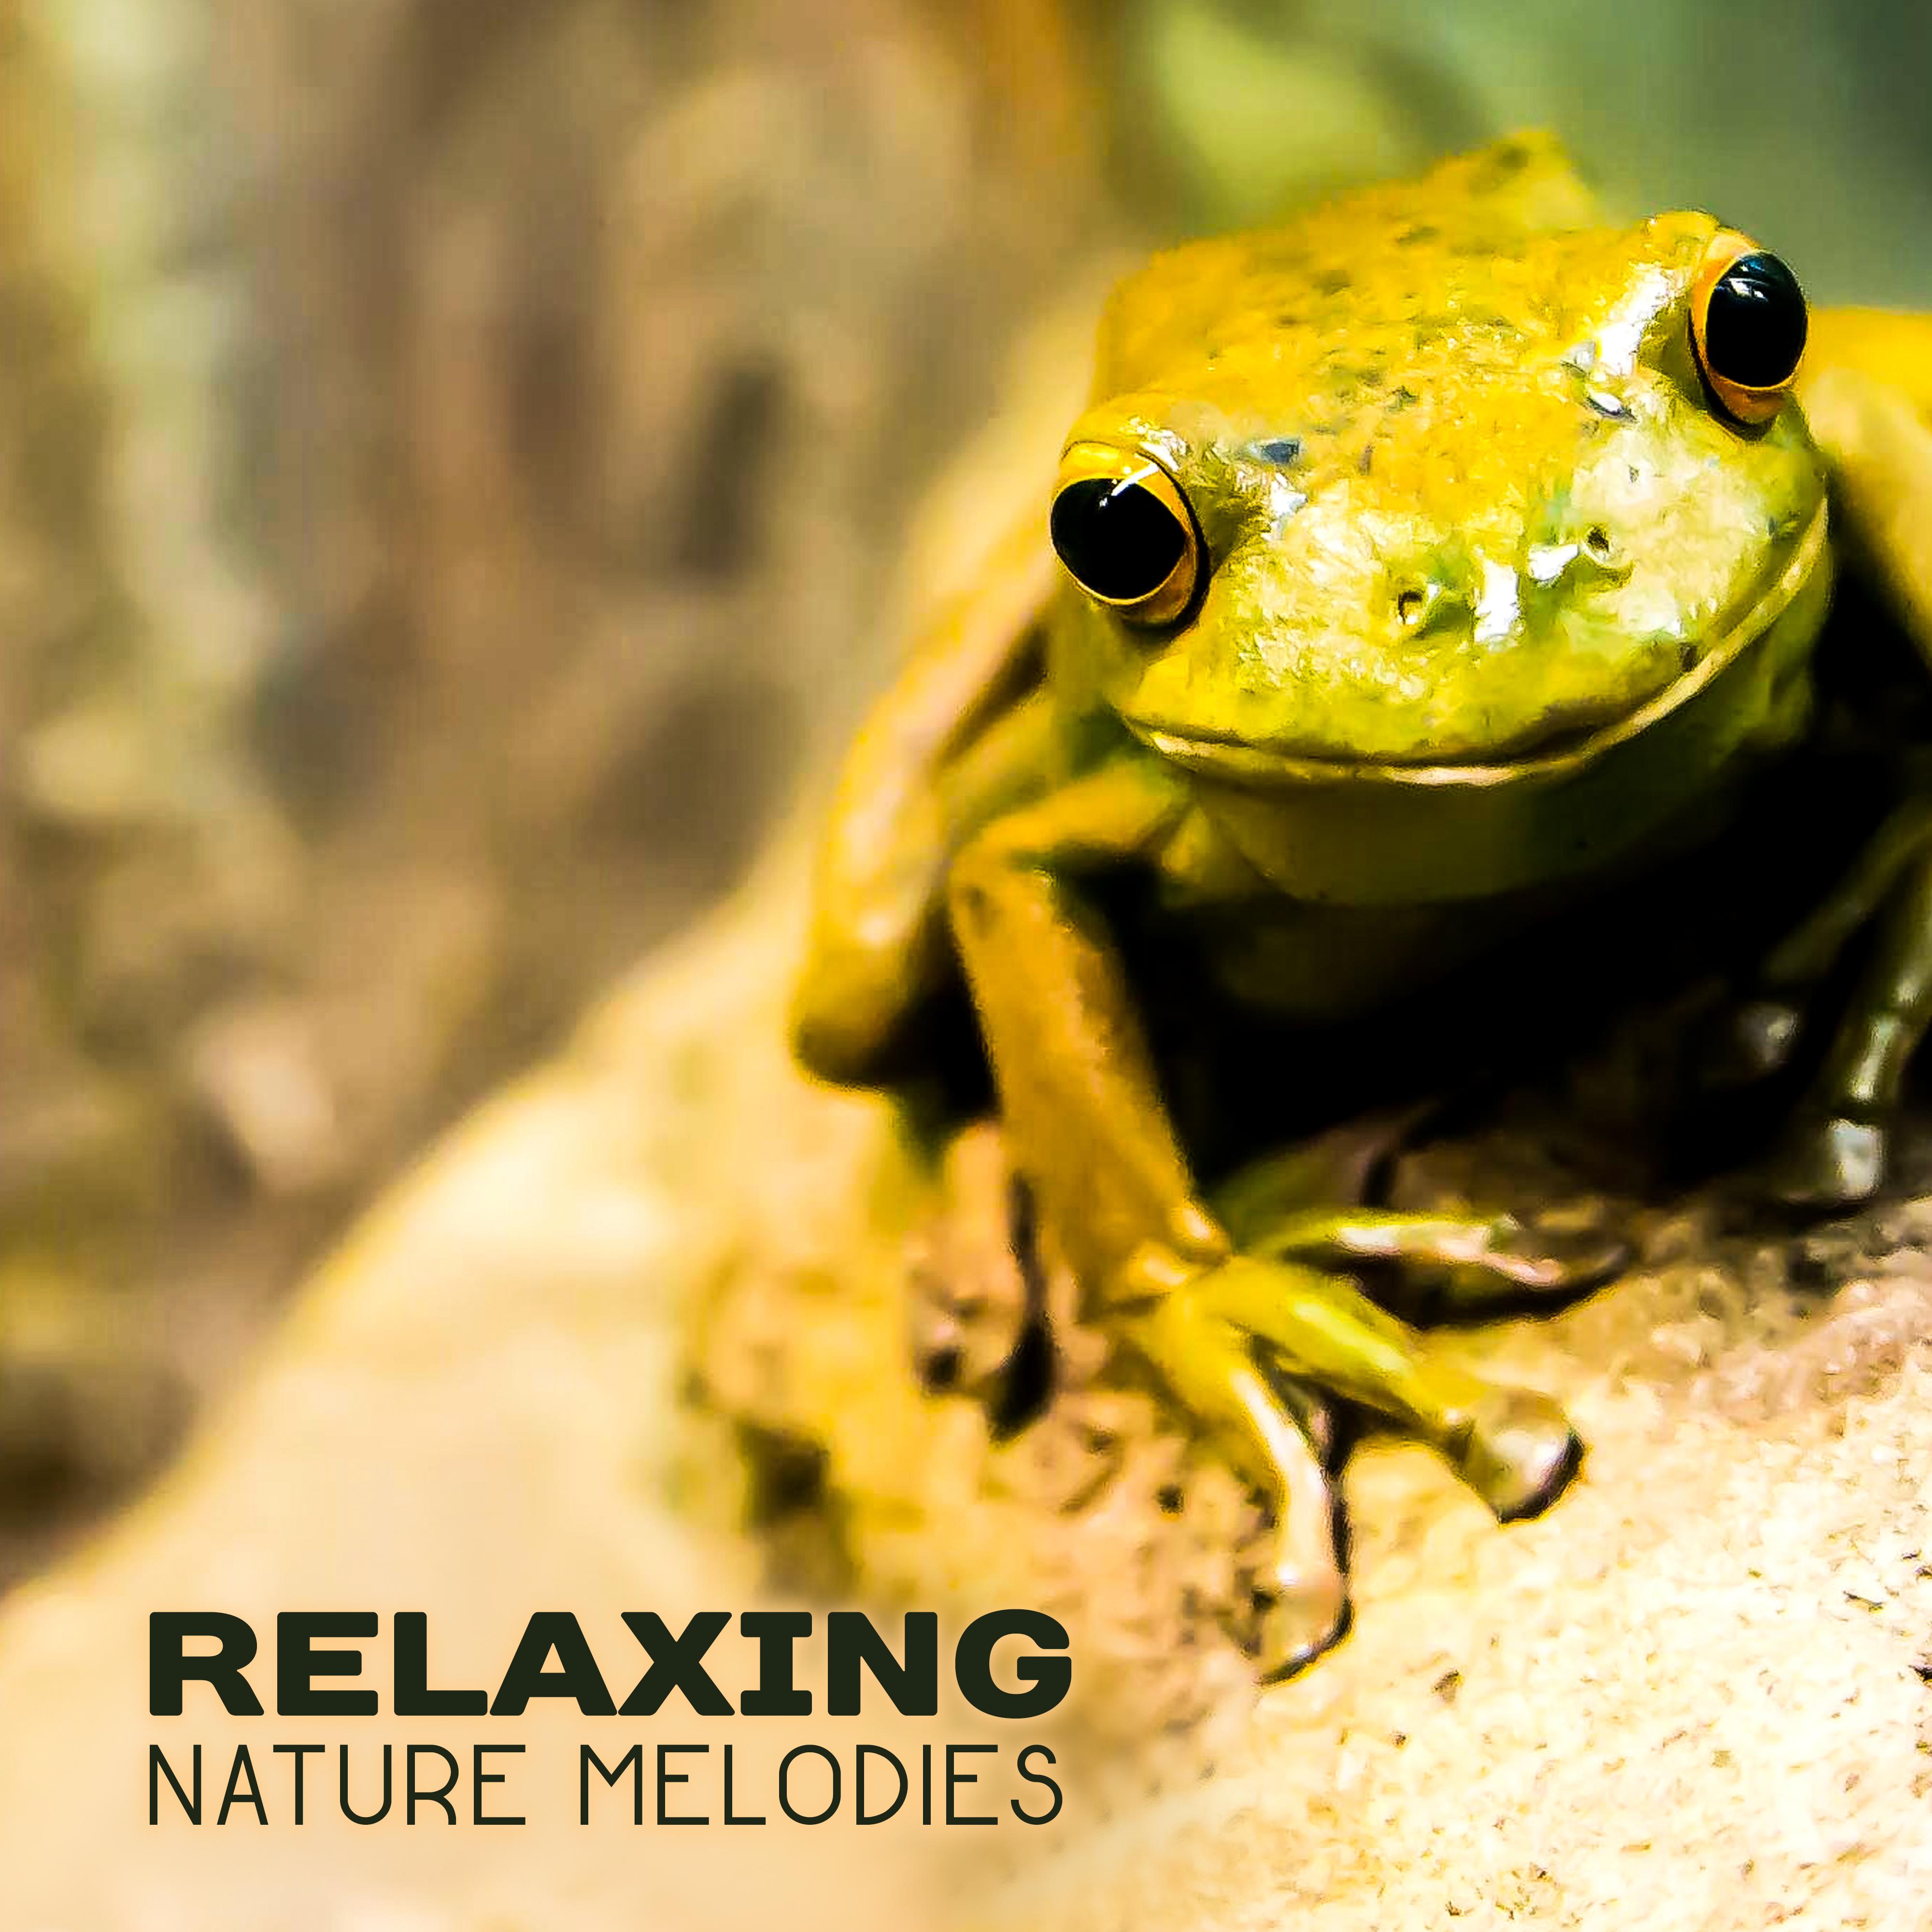 Relaxing Nature Melodies  Calm Music to Rest, Healing Therapy, Nature Waves of Calmness, Mind Peace